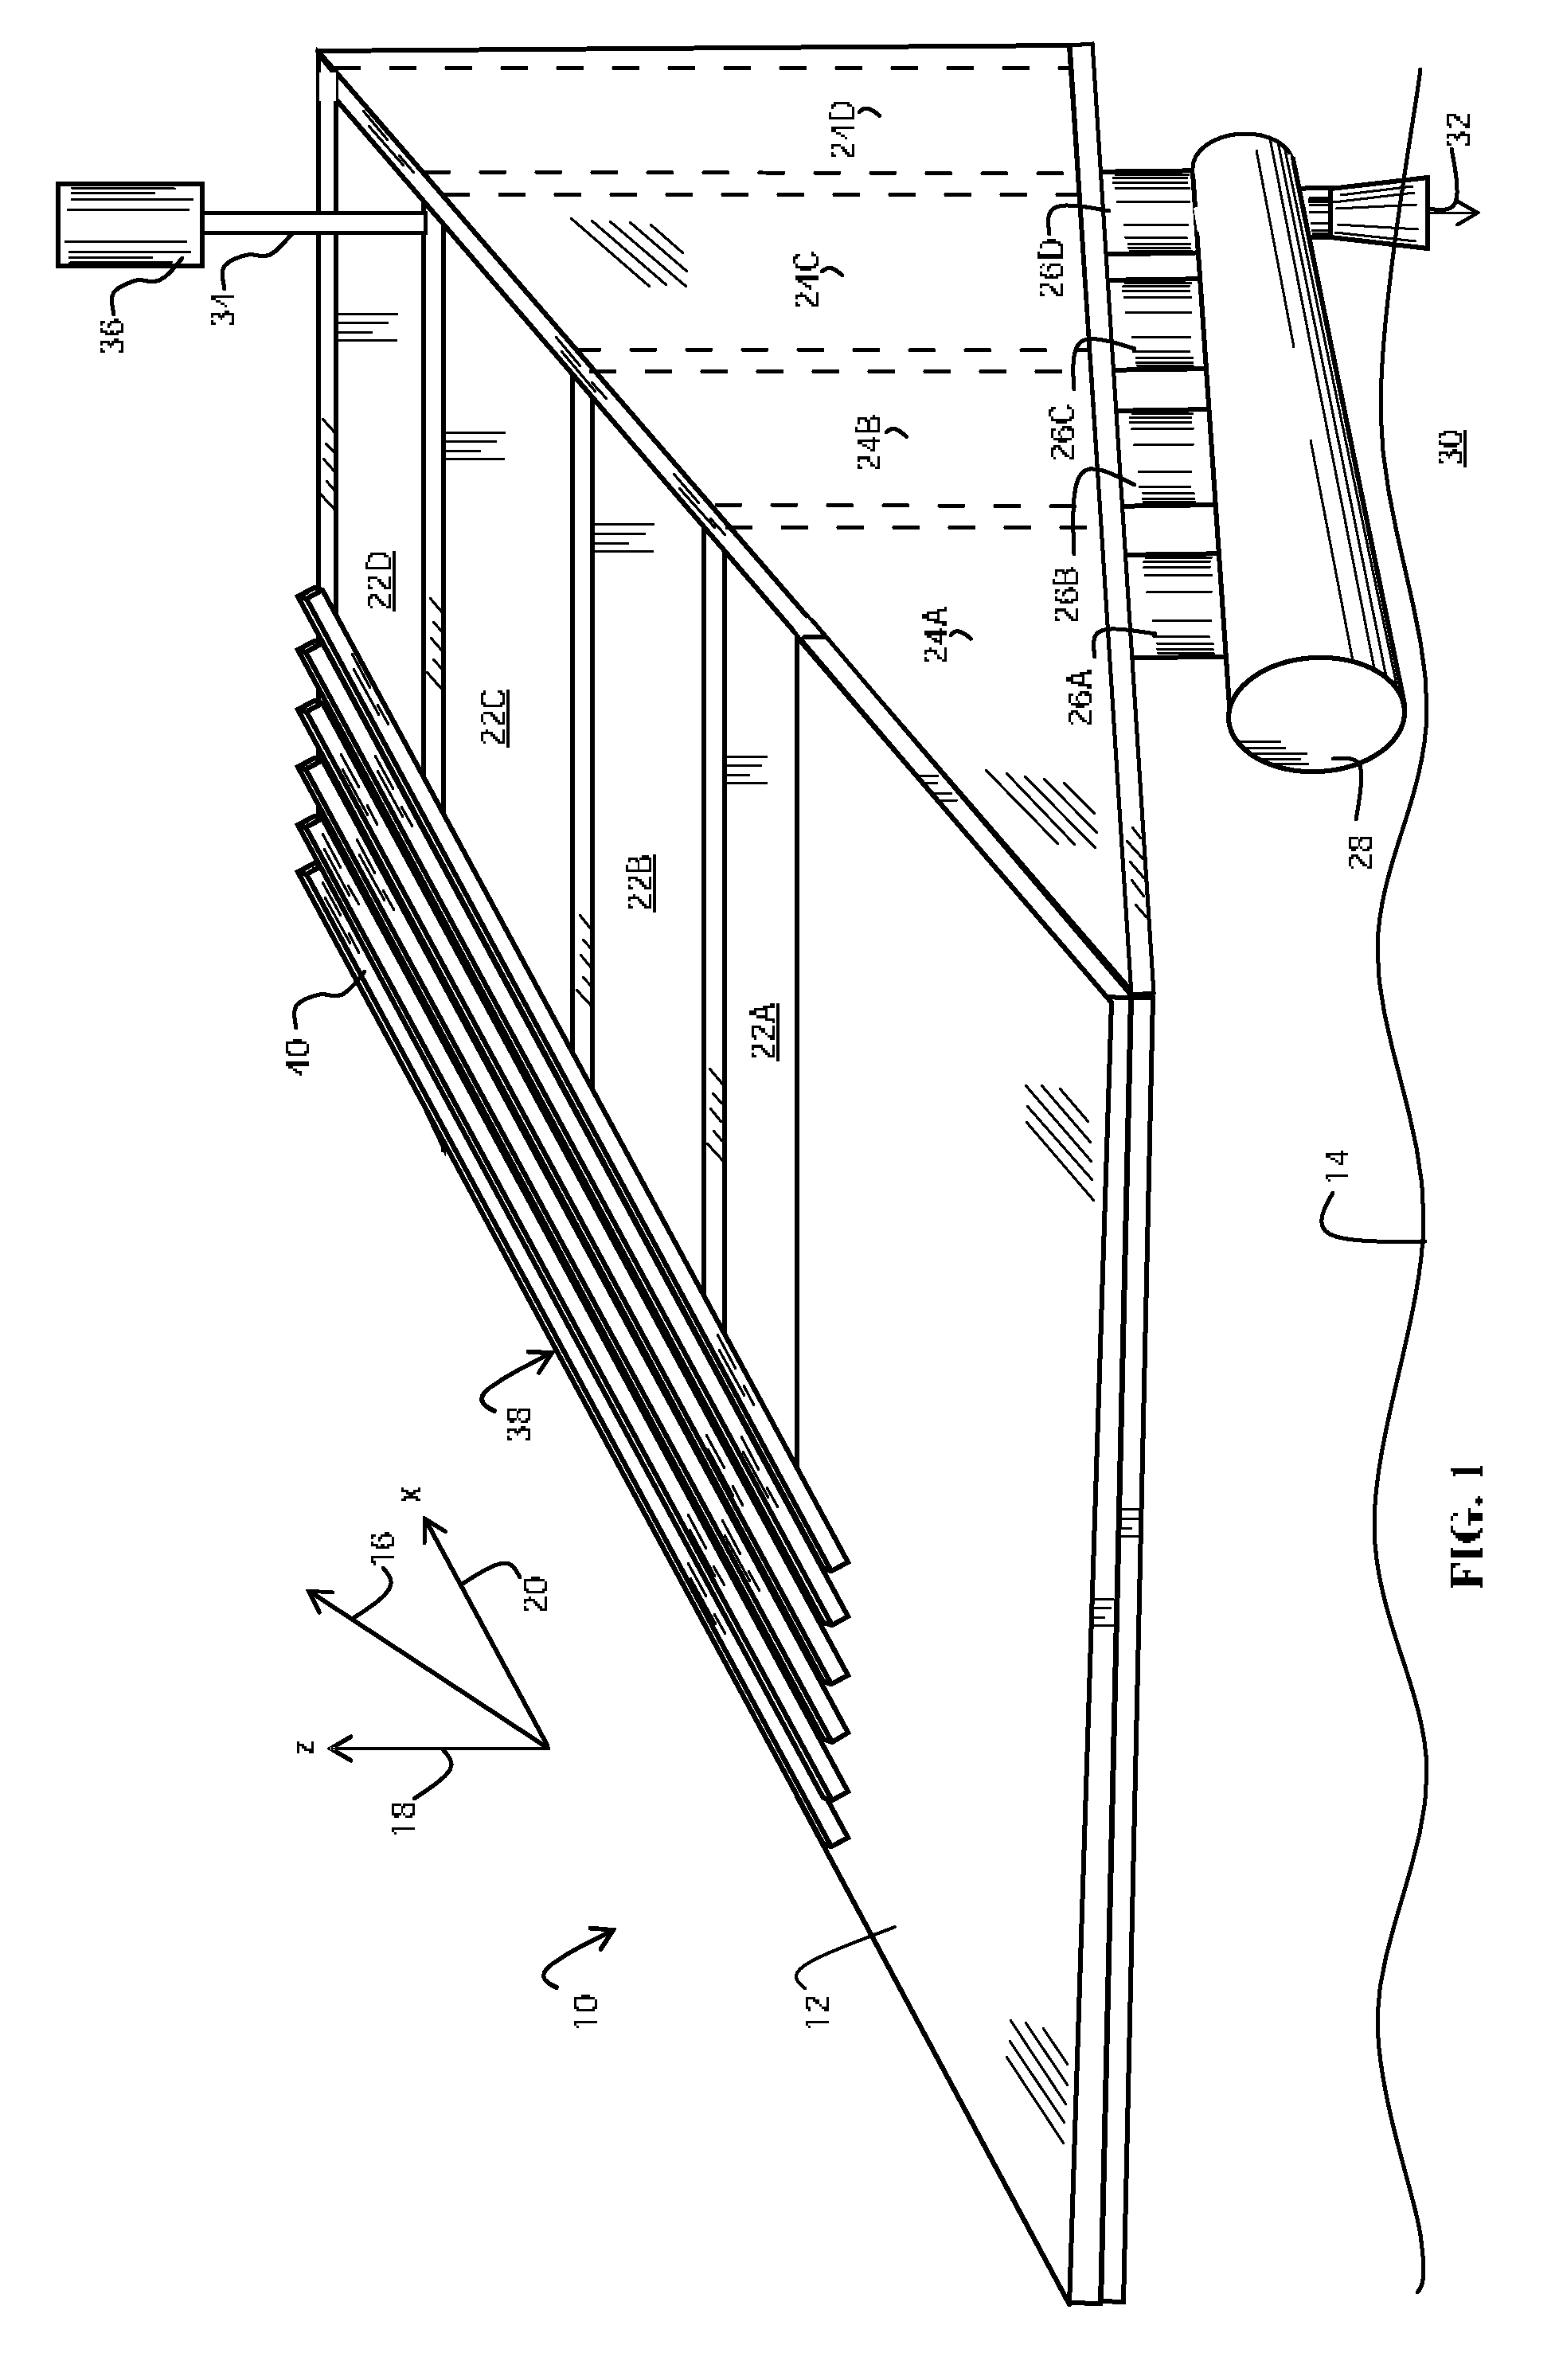 Wave power converter apparatus employing independently staged capture of surge energy